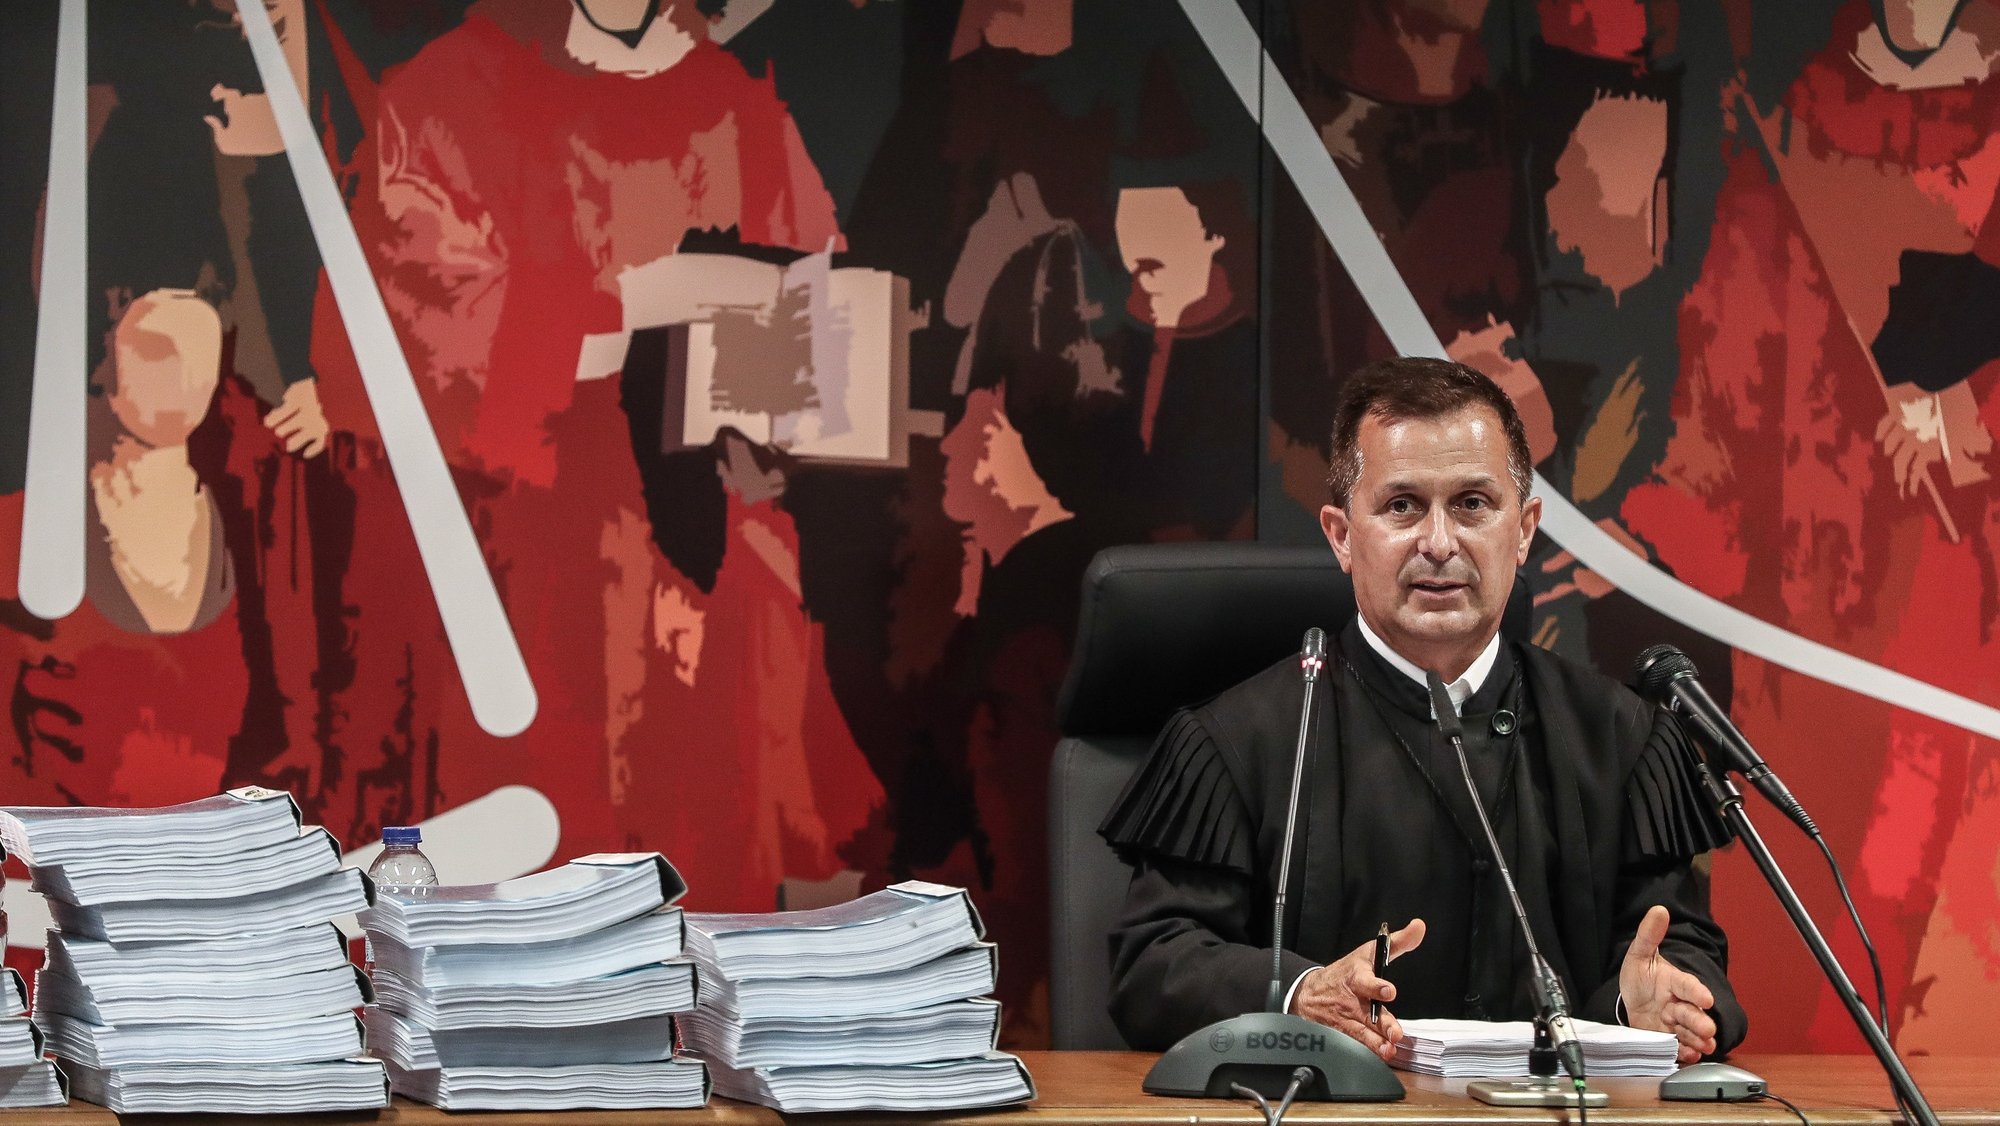 The juge Ivo Rosa reads the instructional decision of the high-profile corruption case known as Operation Marques, at the Justice Campus in Lisbon, Portugal, 09 April 2021. Operation Marques has 28 defendants - 19 people and 9 companies - including former Prime Minister Jose Socrates, banker Ricardo Salgado, businessman and friend of Socrates Carlos Santos Silva, and senior executives of Portugal Telecom, and is related to crimes of active and passive corruption, money laundering, document forgery, and tax fraud.  MARIO CRUZ/POOL/LUSA